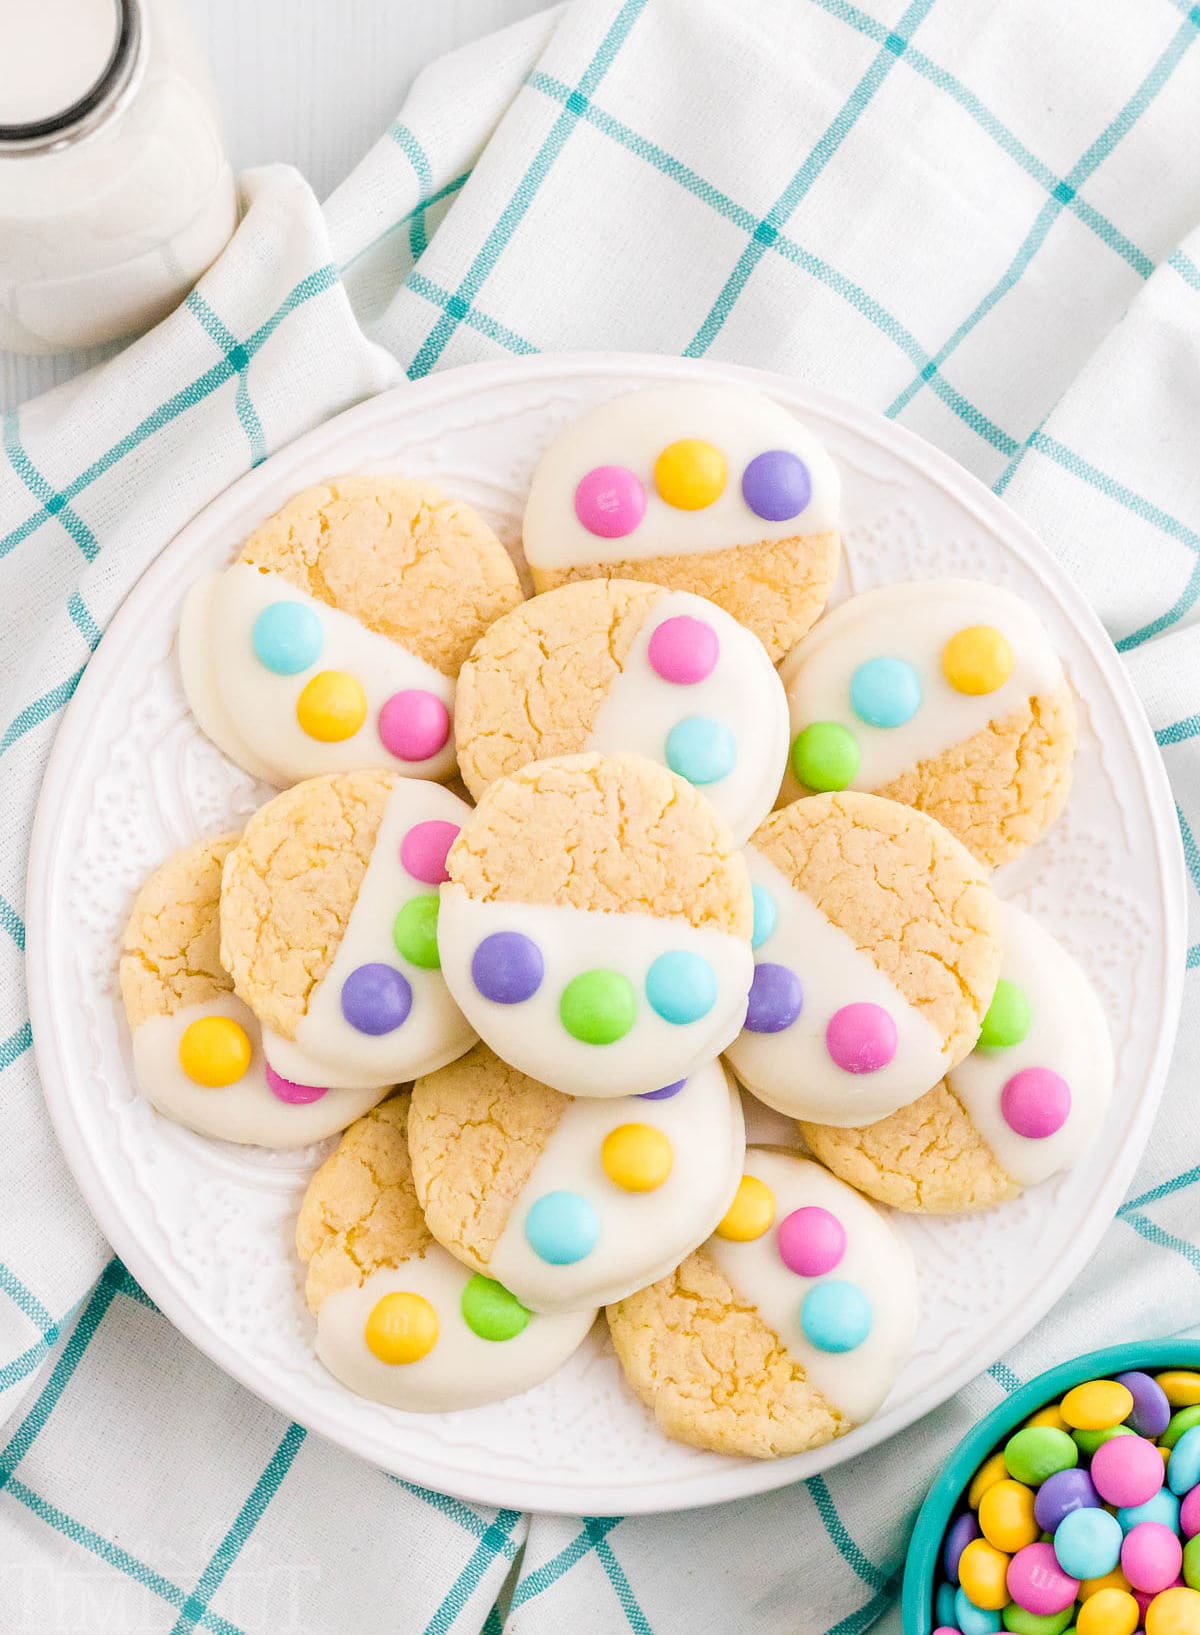 white plate filled with cake mix cookies dipped in candy melts and topped with three m&ms to resemble a bunny paw print.